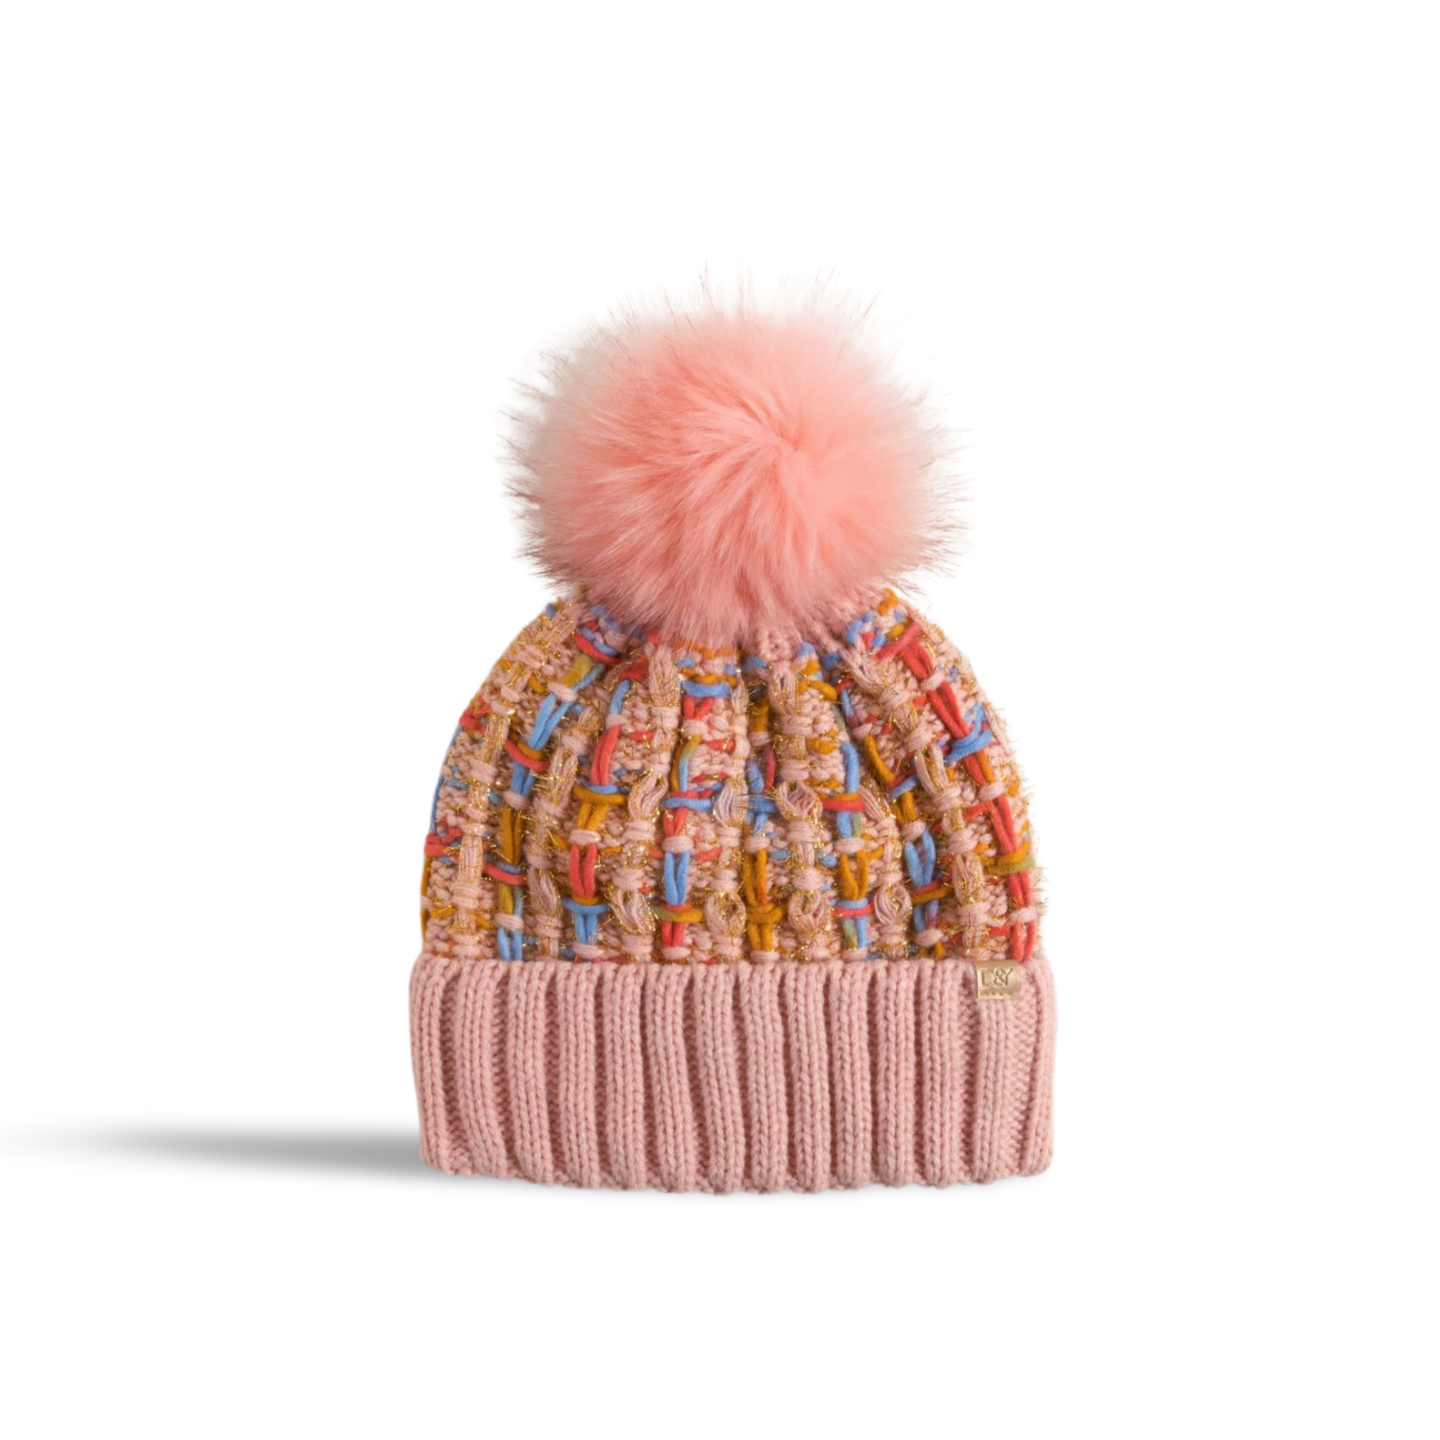 ABB0802 - CHUNKY KNIT BEANIE WITH FAUX POM AND LINING